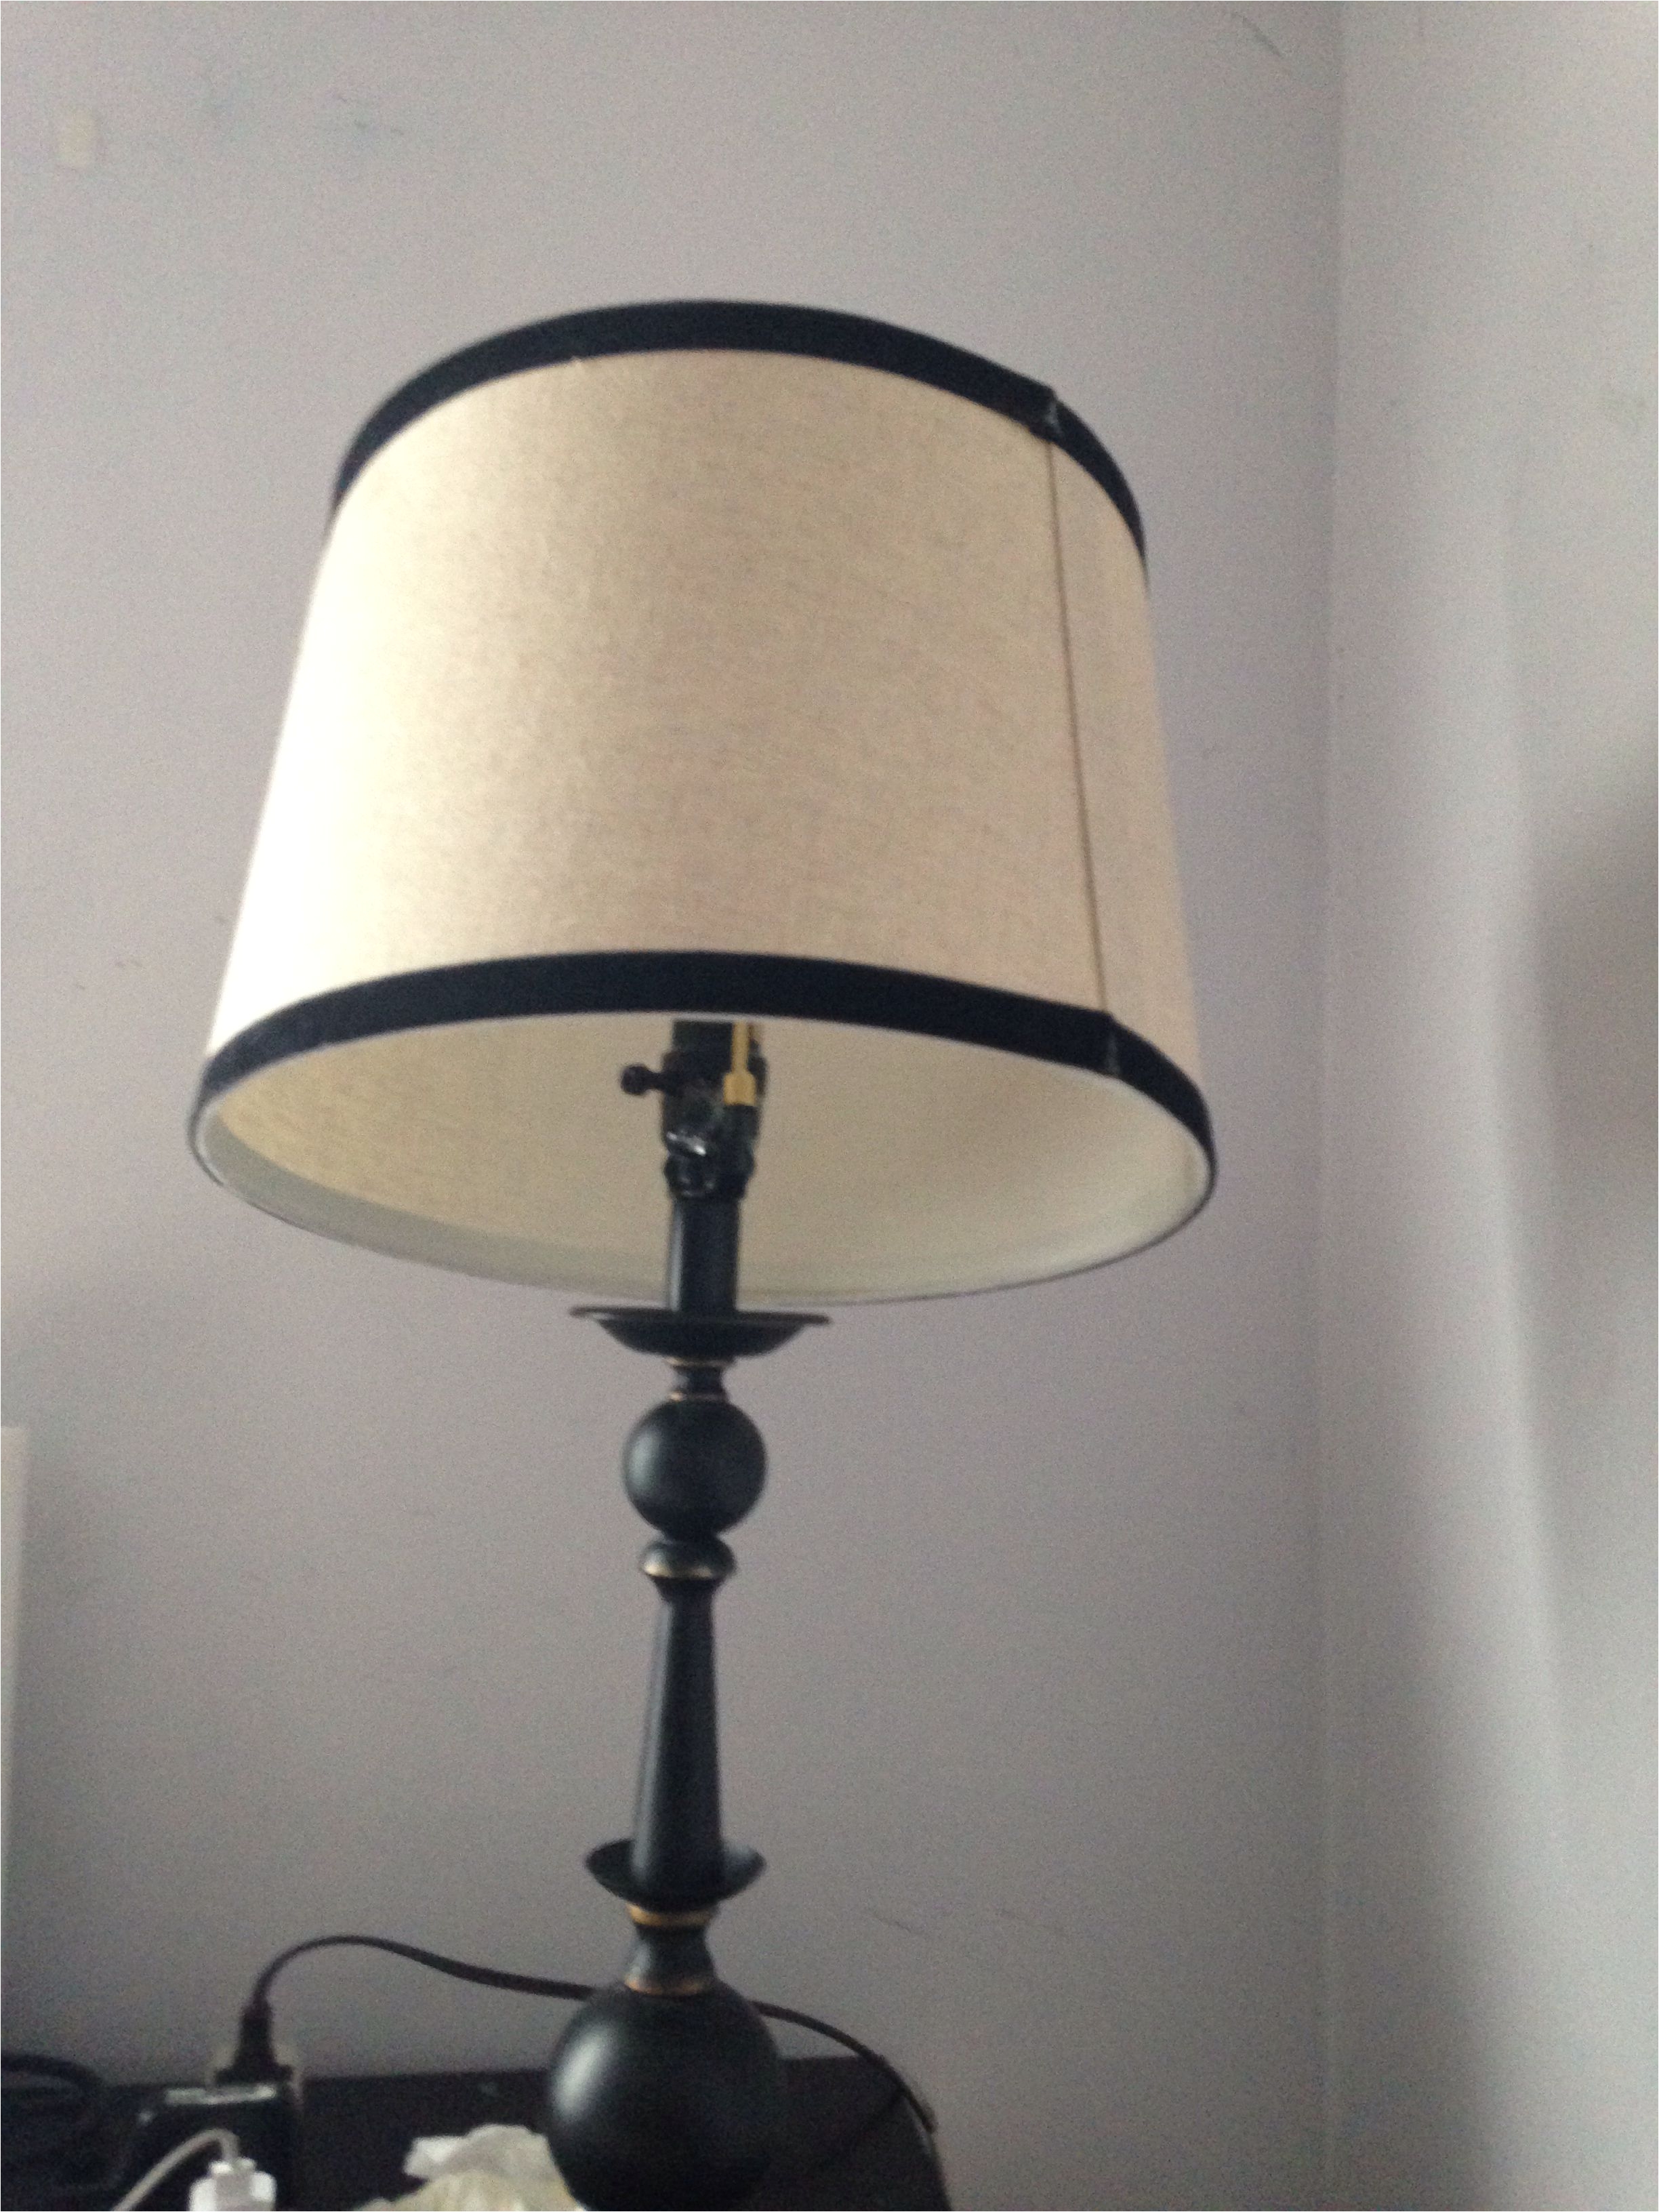 lampshade wont stay straight